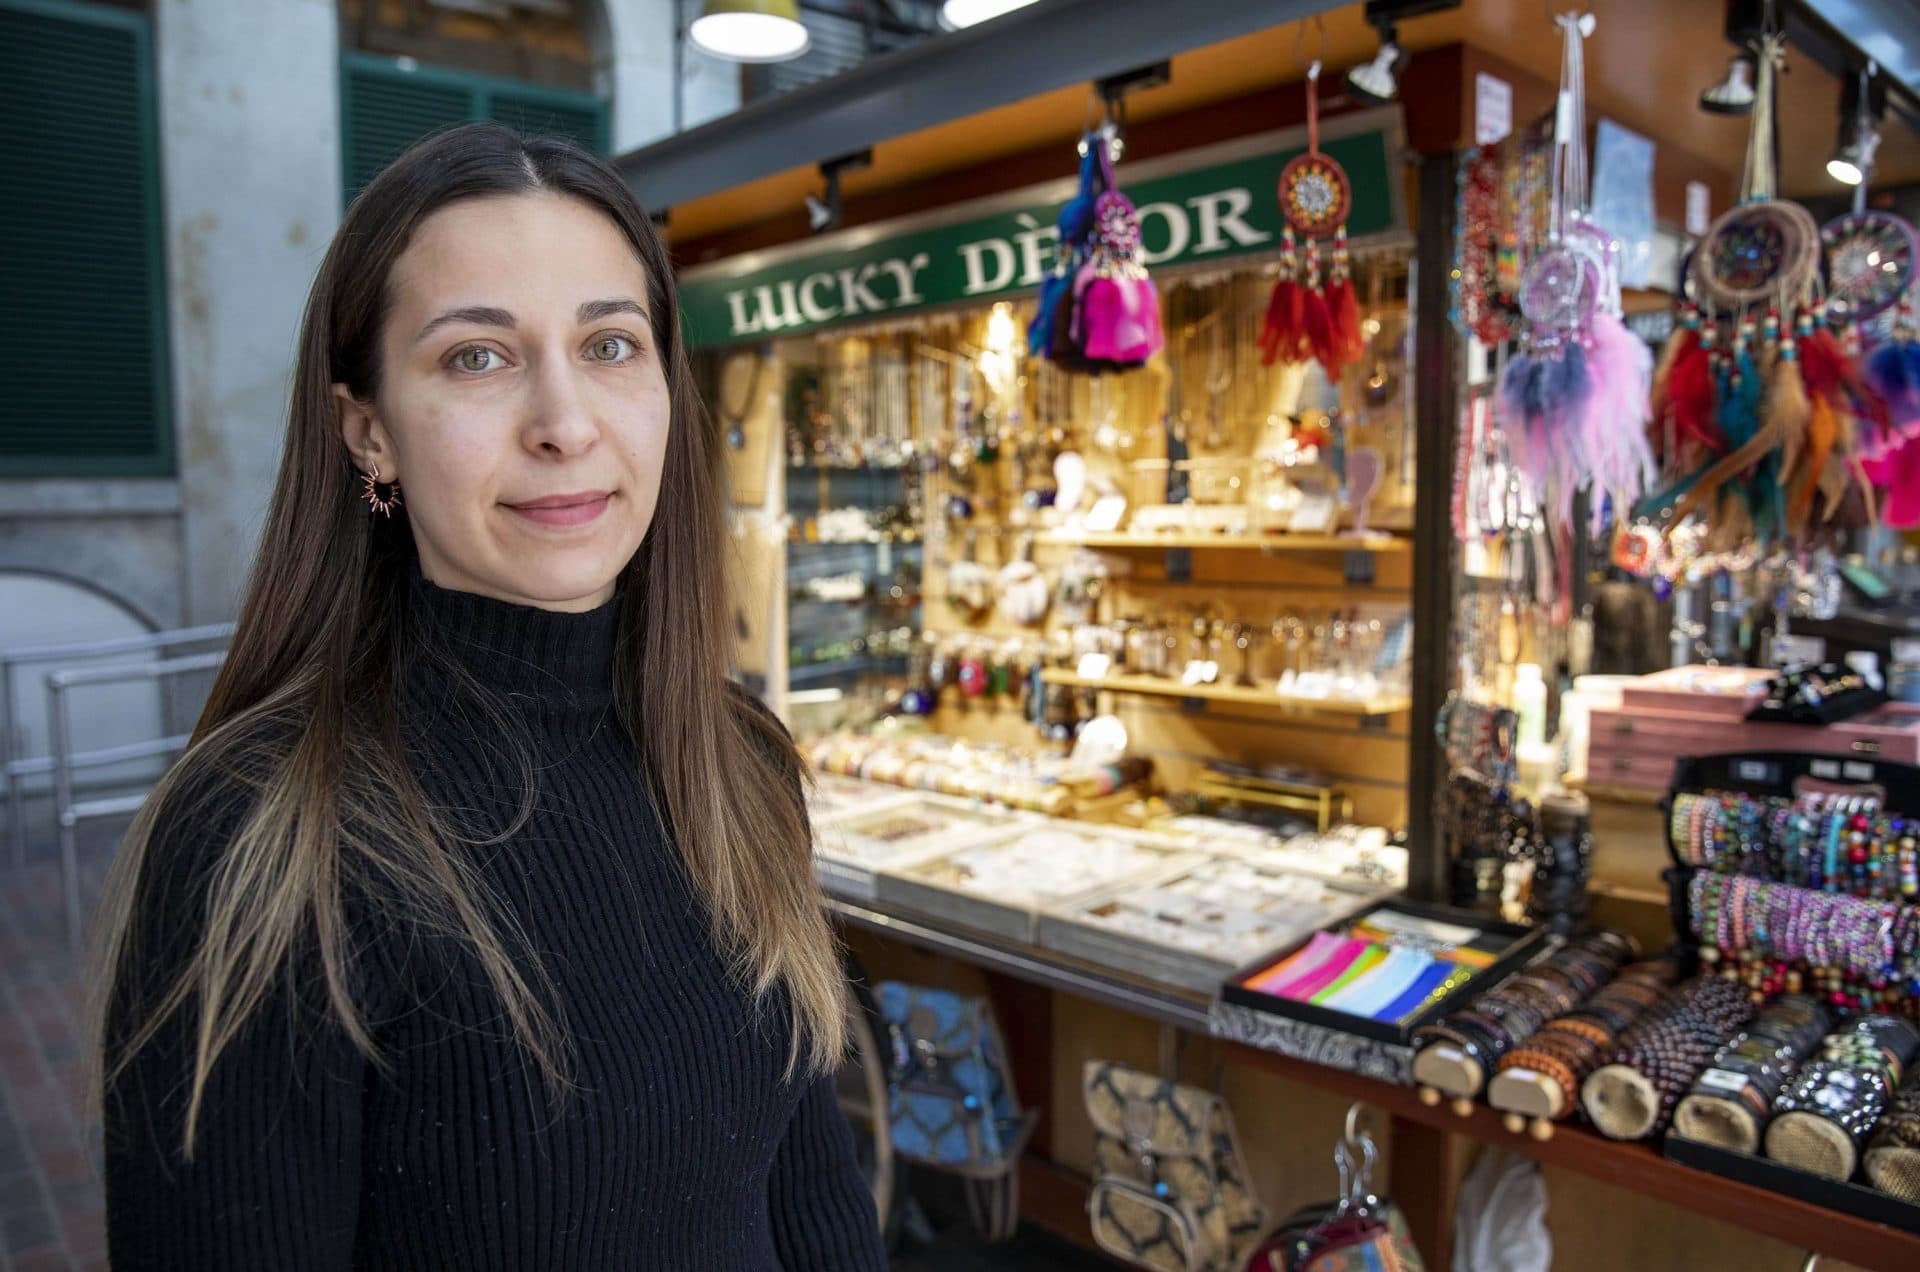 Elif Murat, owner of Lucky Decor, by her stand in Faneuil Hall Marketplace. (Robin Lubbock/WBUR)